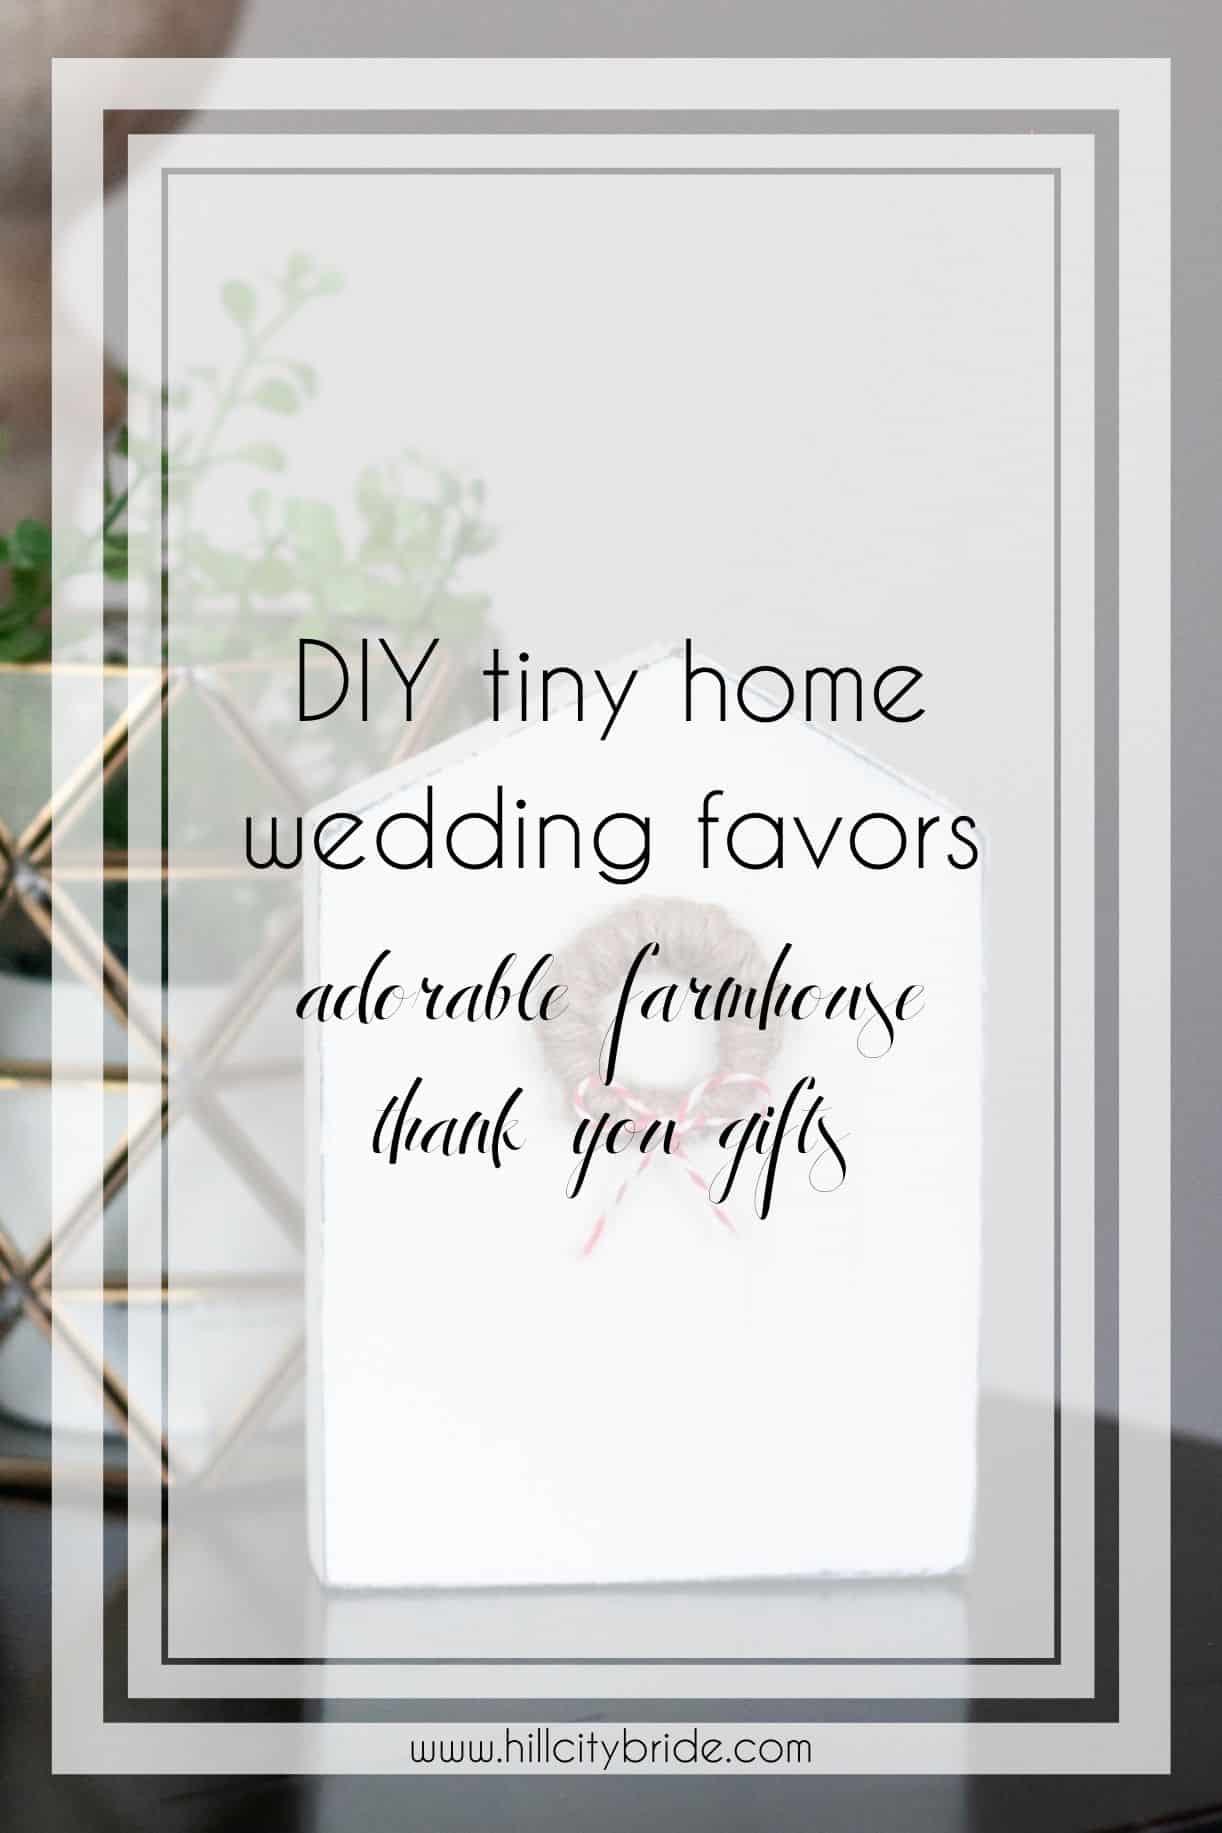 Make This Adorable DIY Tiny Home for Your Wedding Day Favors